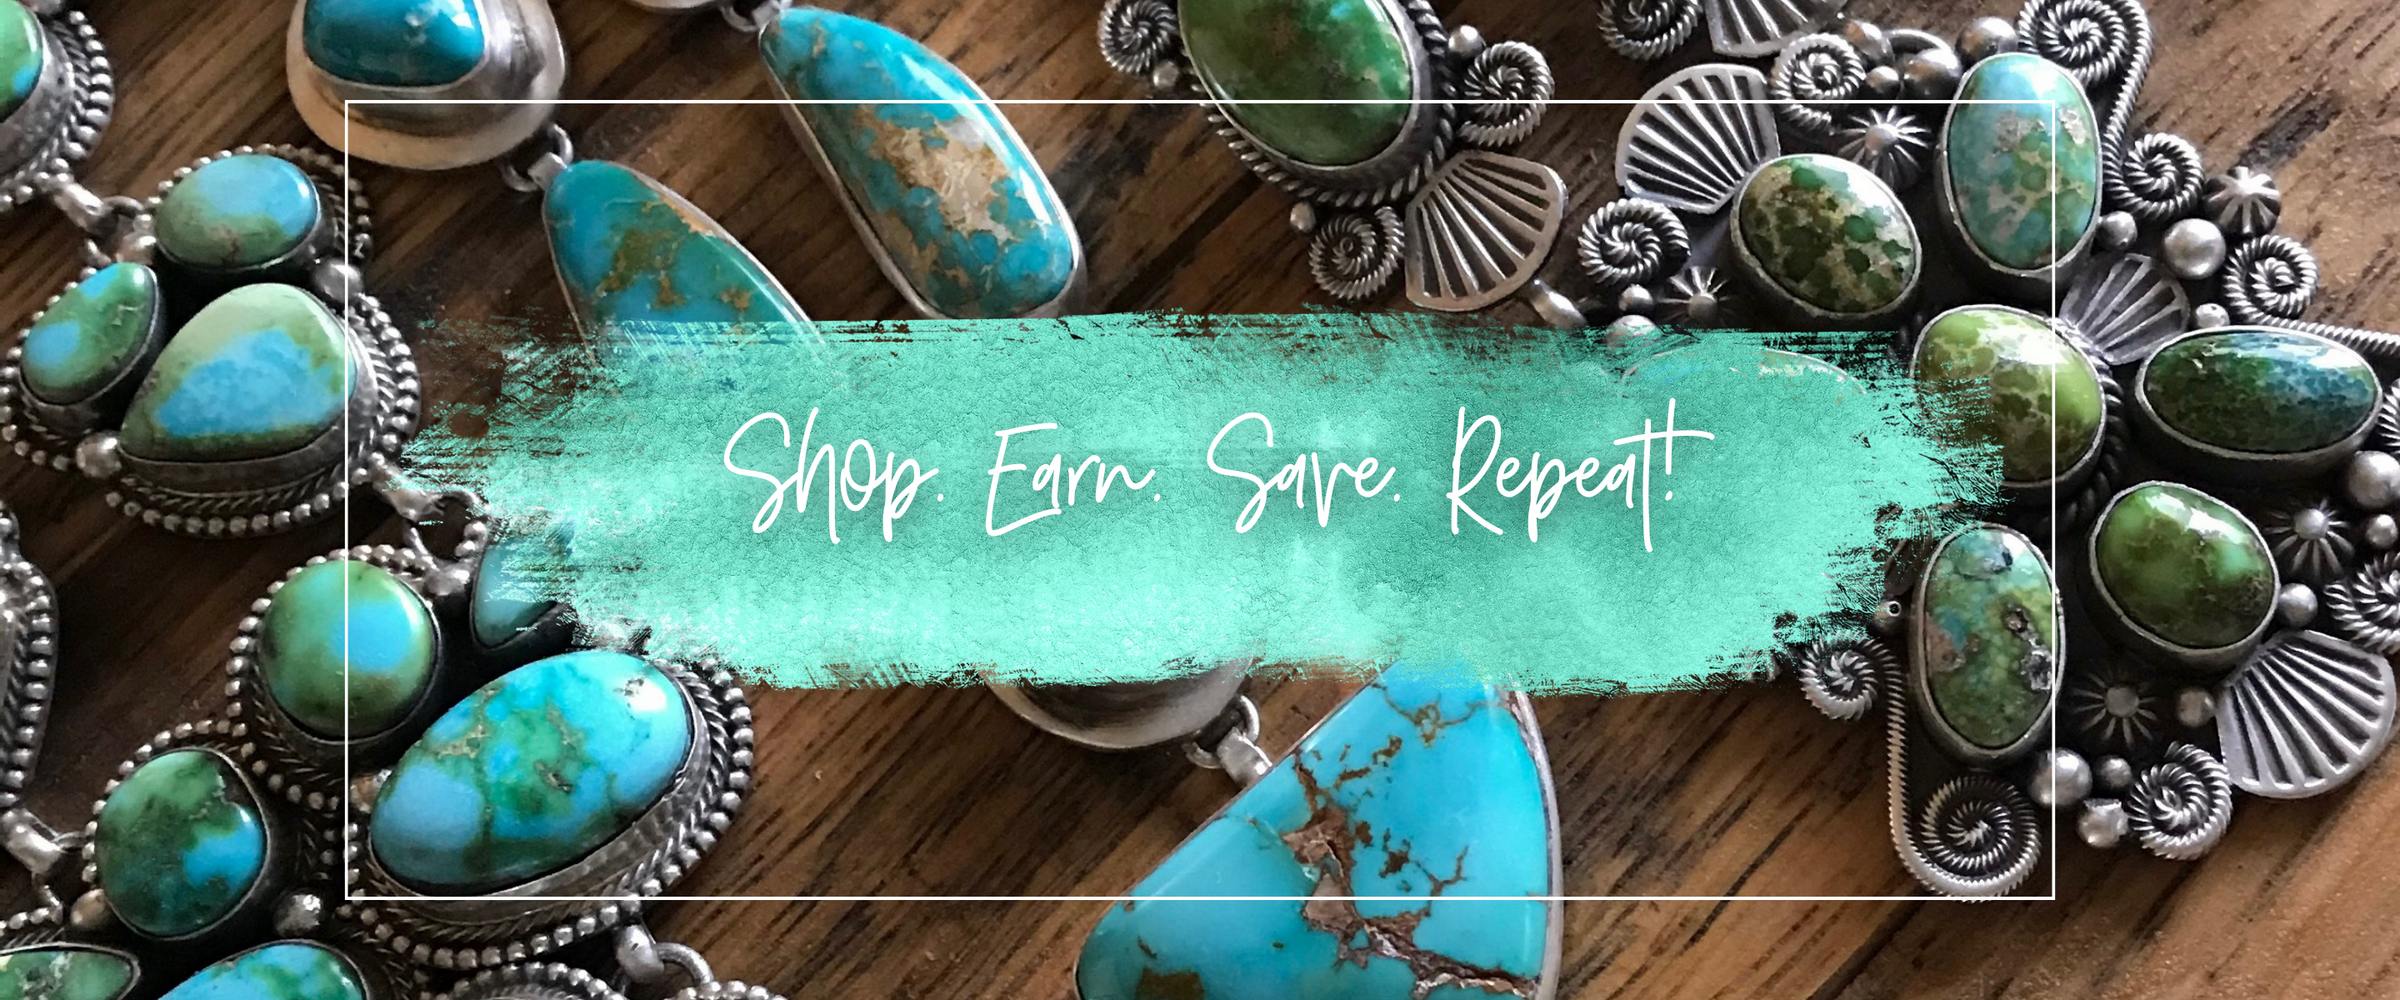 Shop. Earn. Save. Repeat | Calli Co. Silver | Handmade Sterling Silver Jewelry | Located in Fort Worth, TX